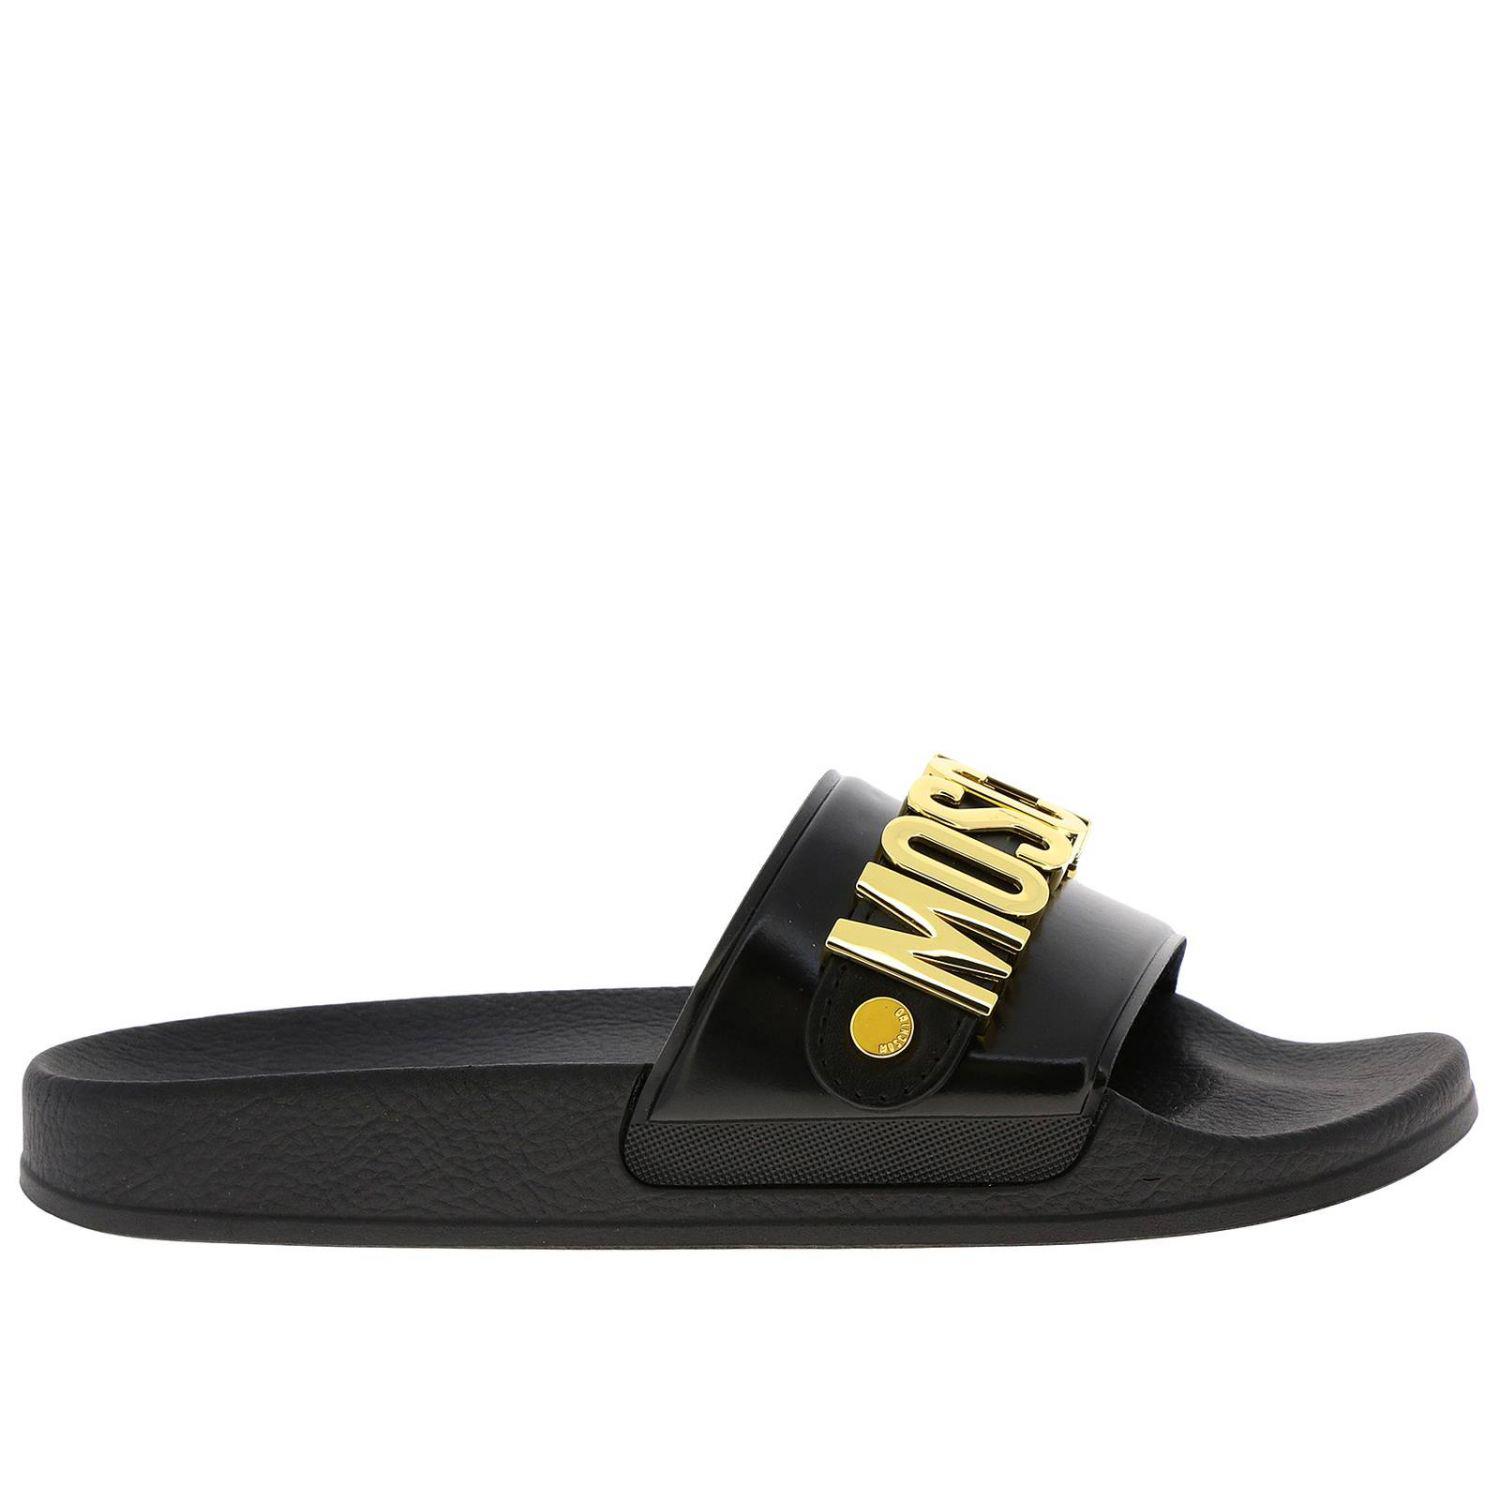 Moschino Couture Flat Sandals Shoes Women in Black Lyst